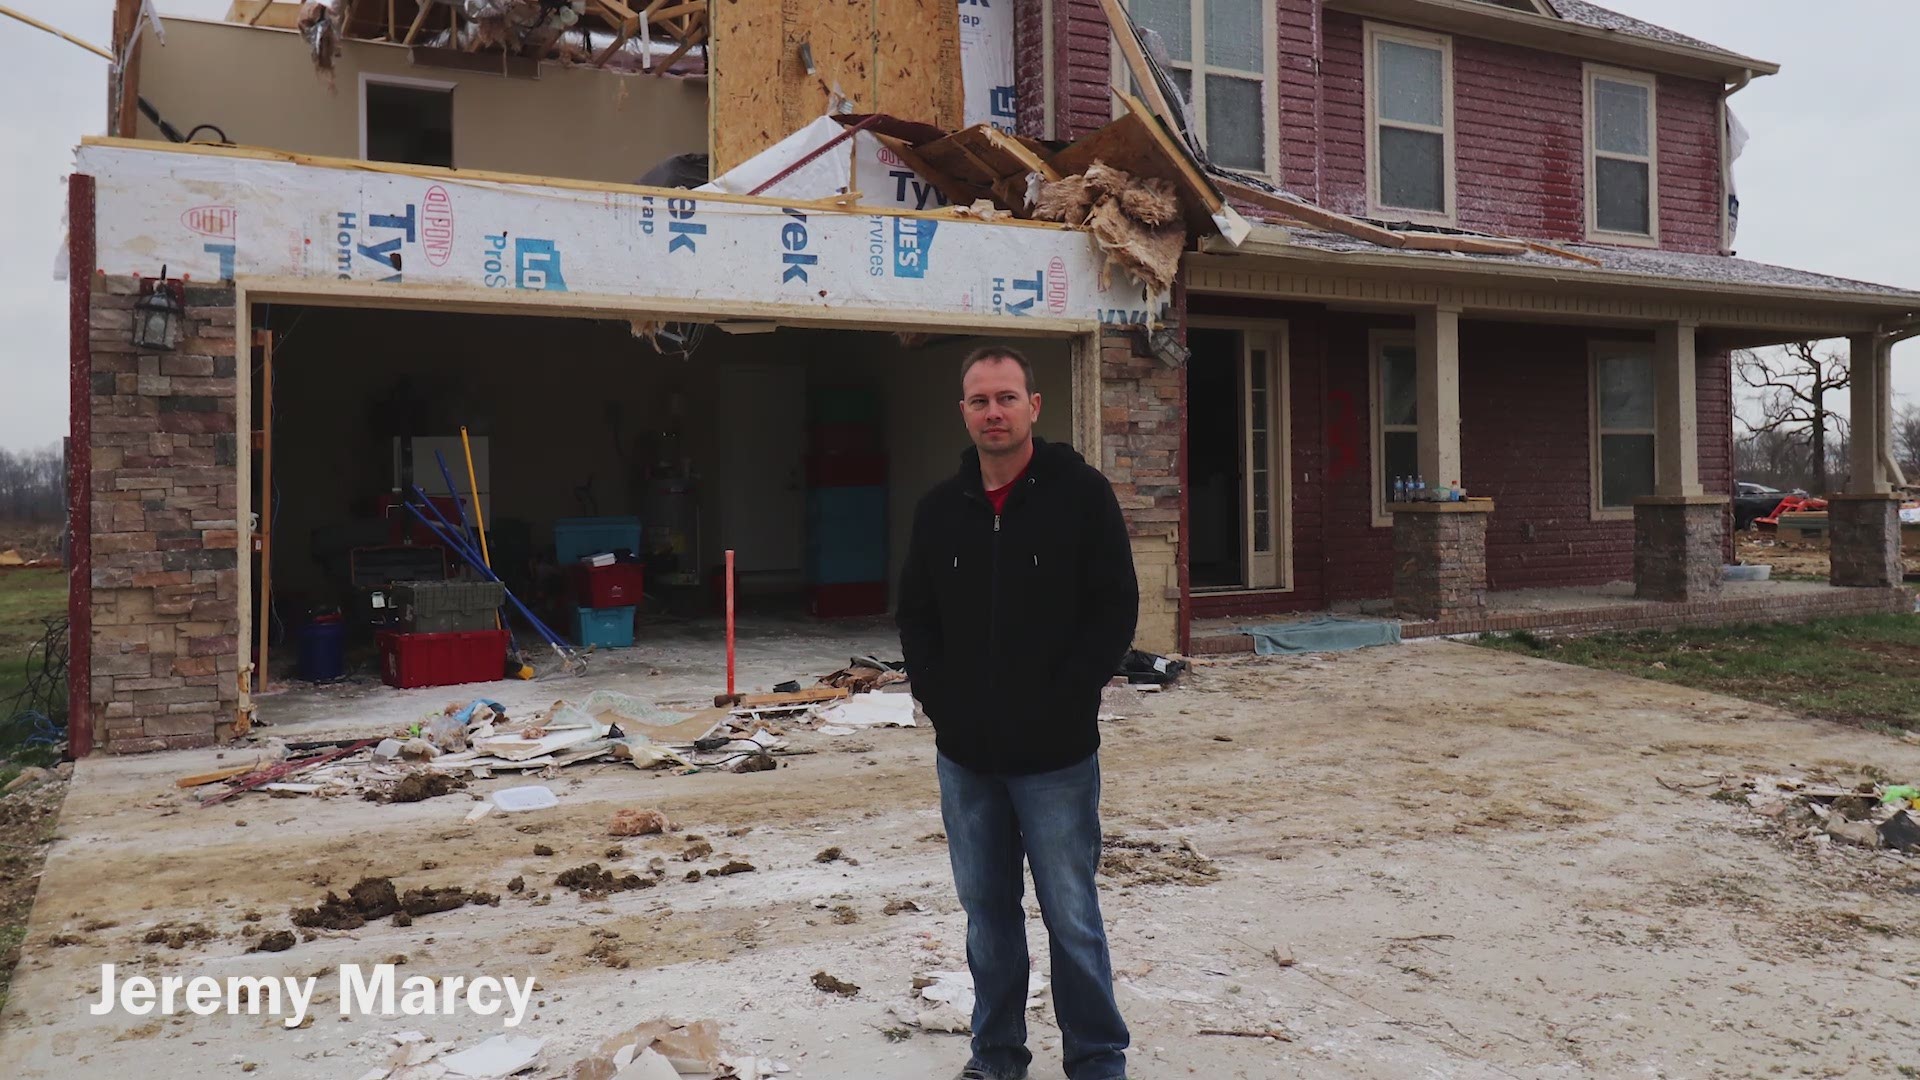 Survivor Jeremy Marcy recounts the devastation he saw in the immediate aftermath of the tornado in Cookeville.